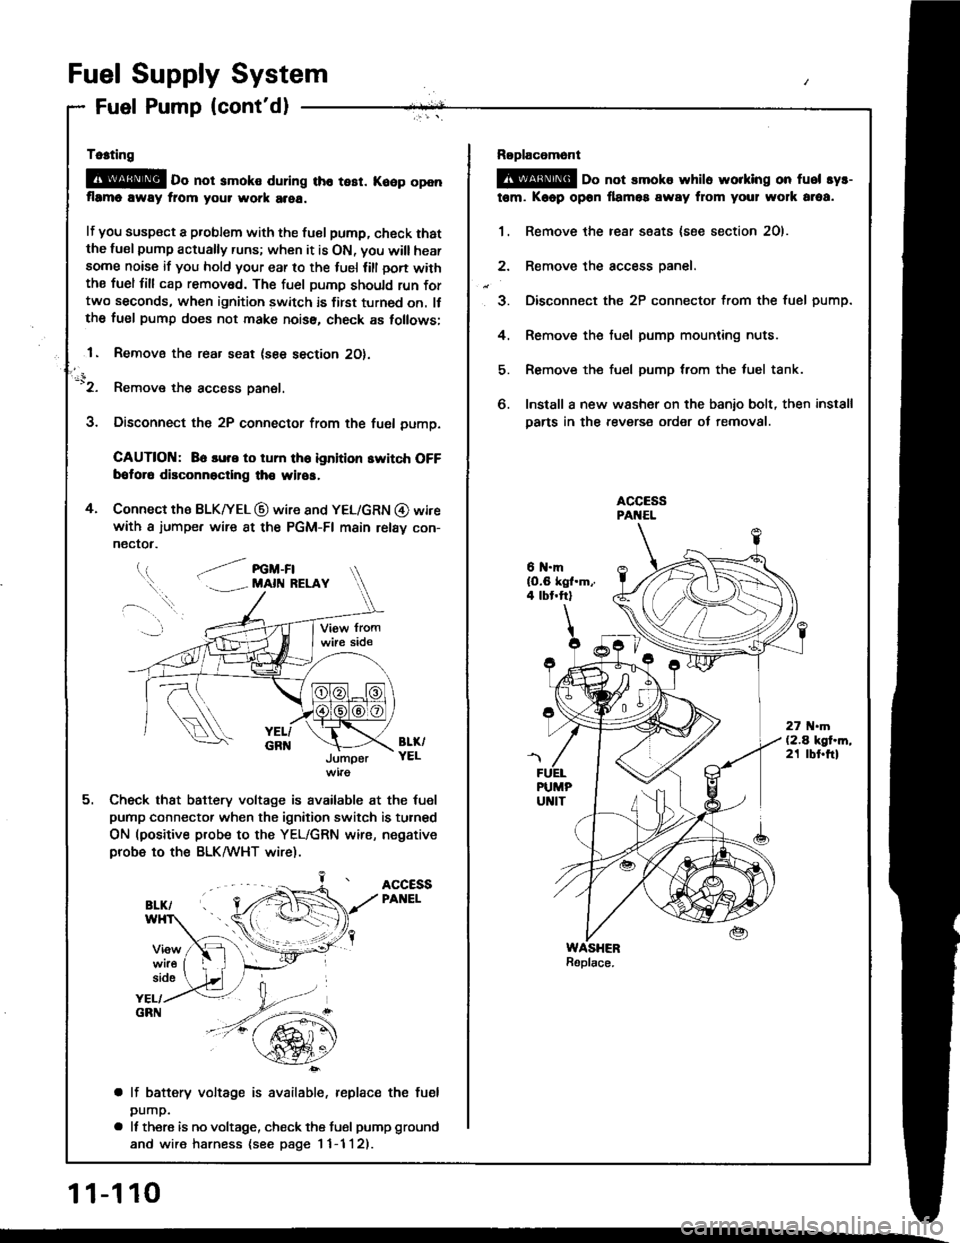 HONDA INTEGRA 1994 4.G User Guide Fuel Supply System
Fuel Pump (contdl
Tc.ting
@E o" not smoko during tho tesr. Koop openflrmo away fiom your work area.
lf you susp€ct a problem with the tuel pump, check thatthe lusl pump actually 